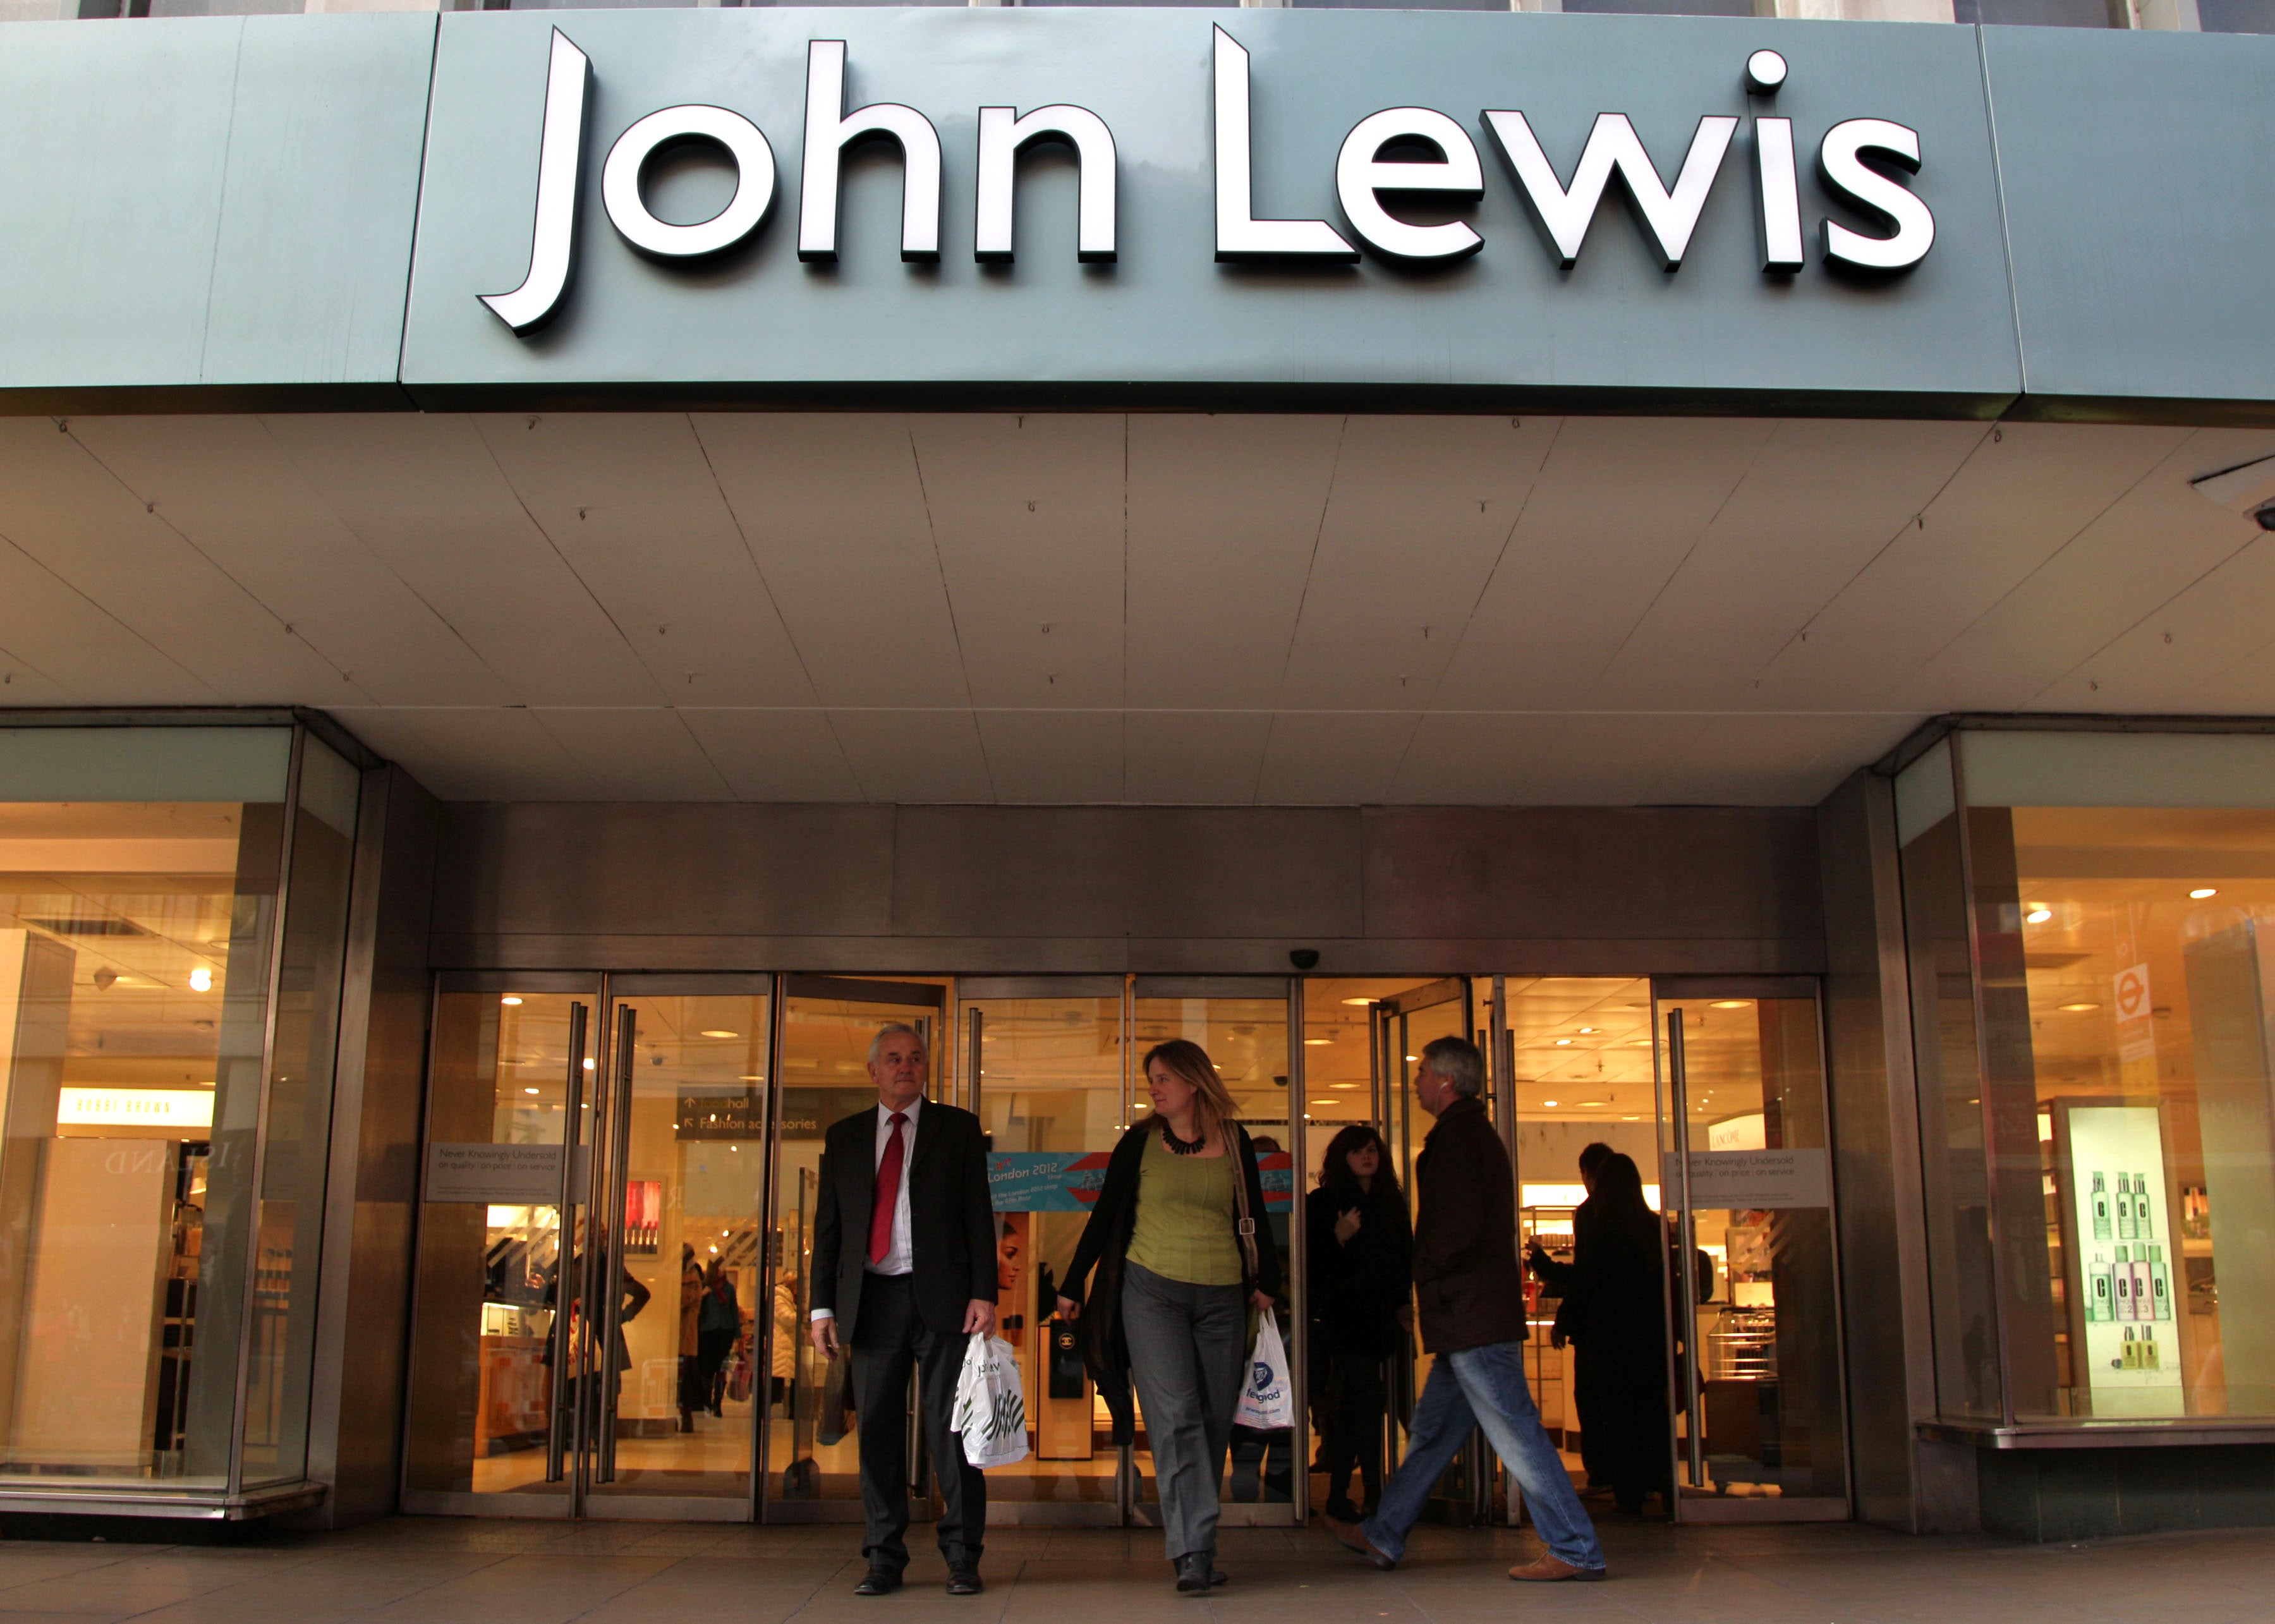 A John Lewis store in London